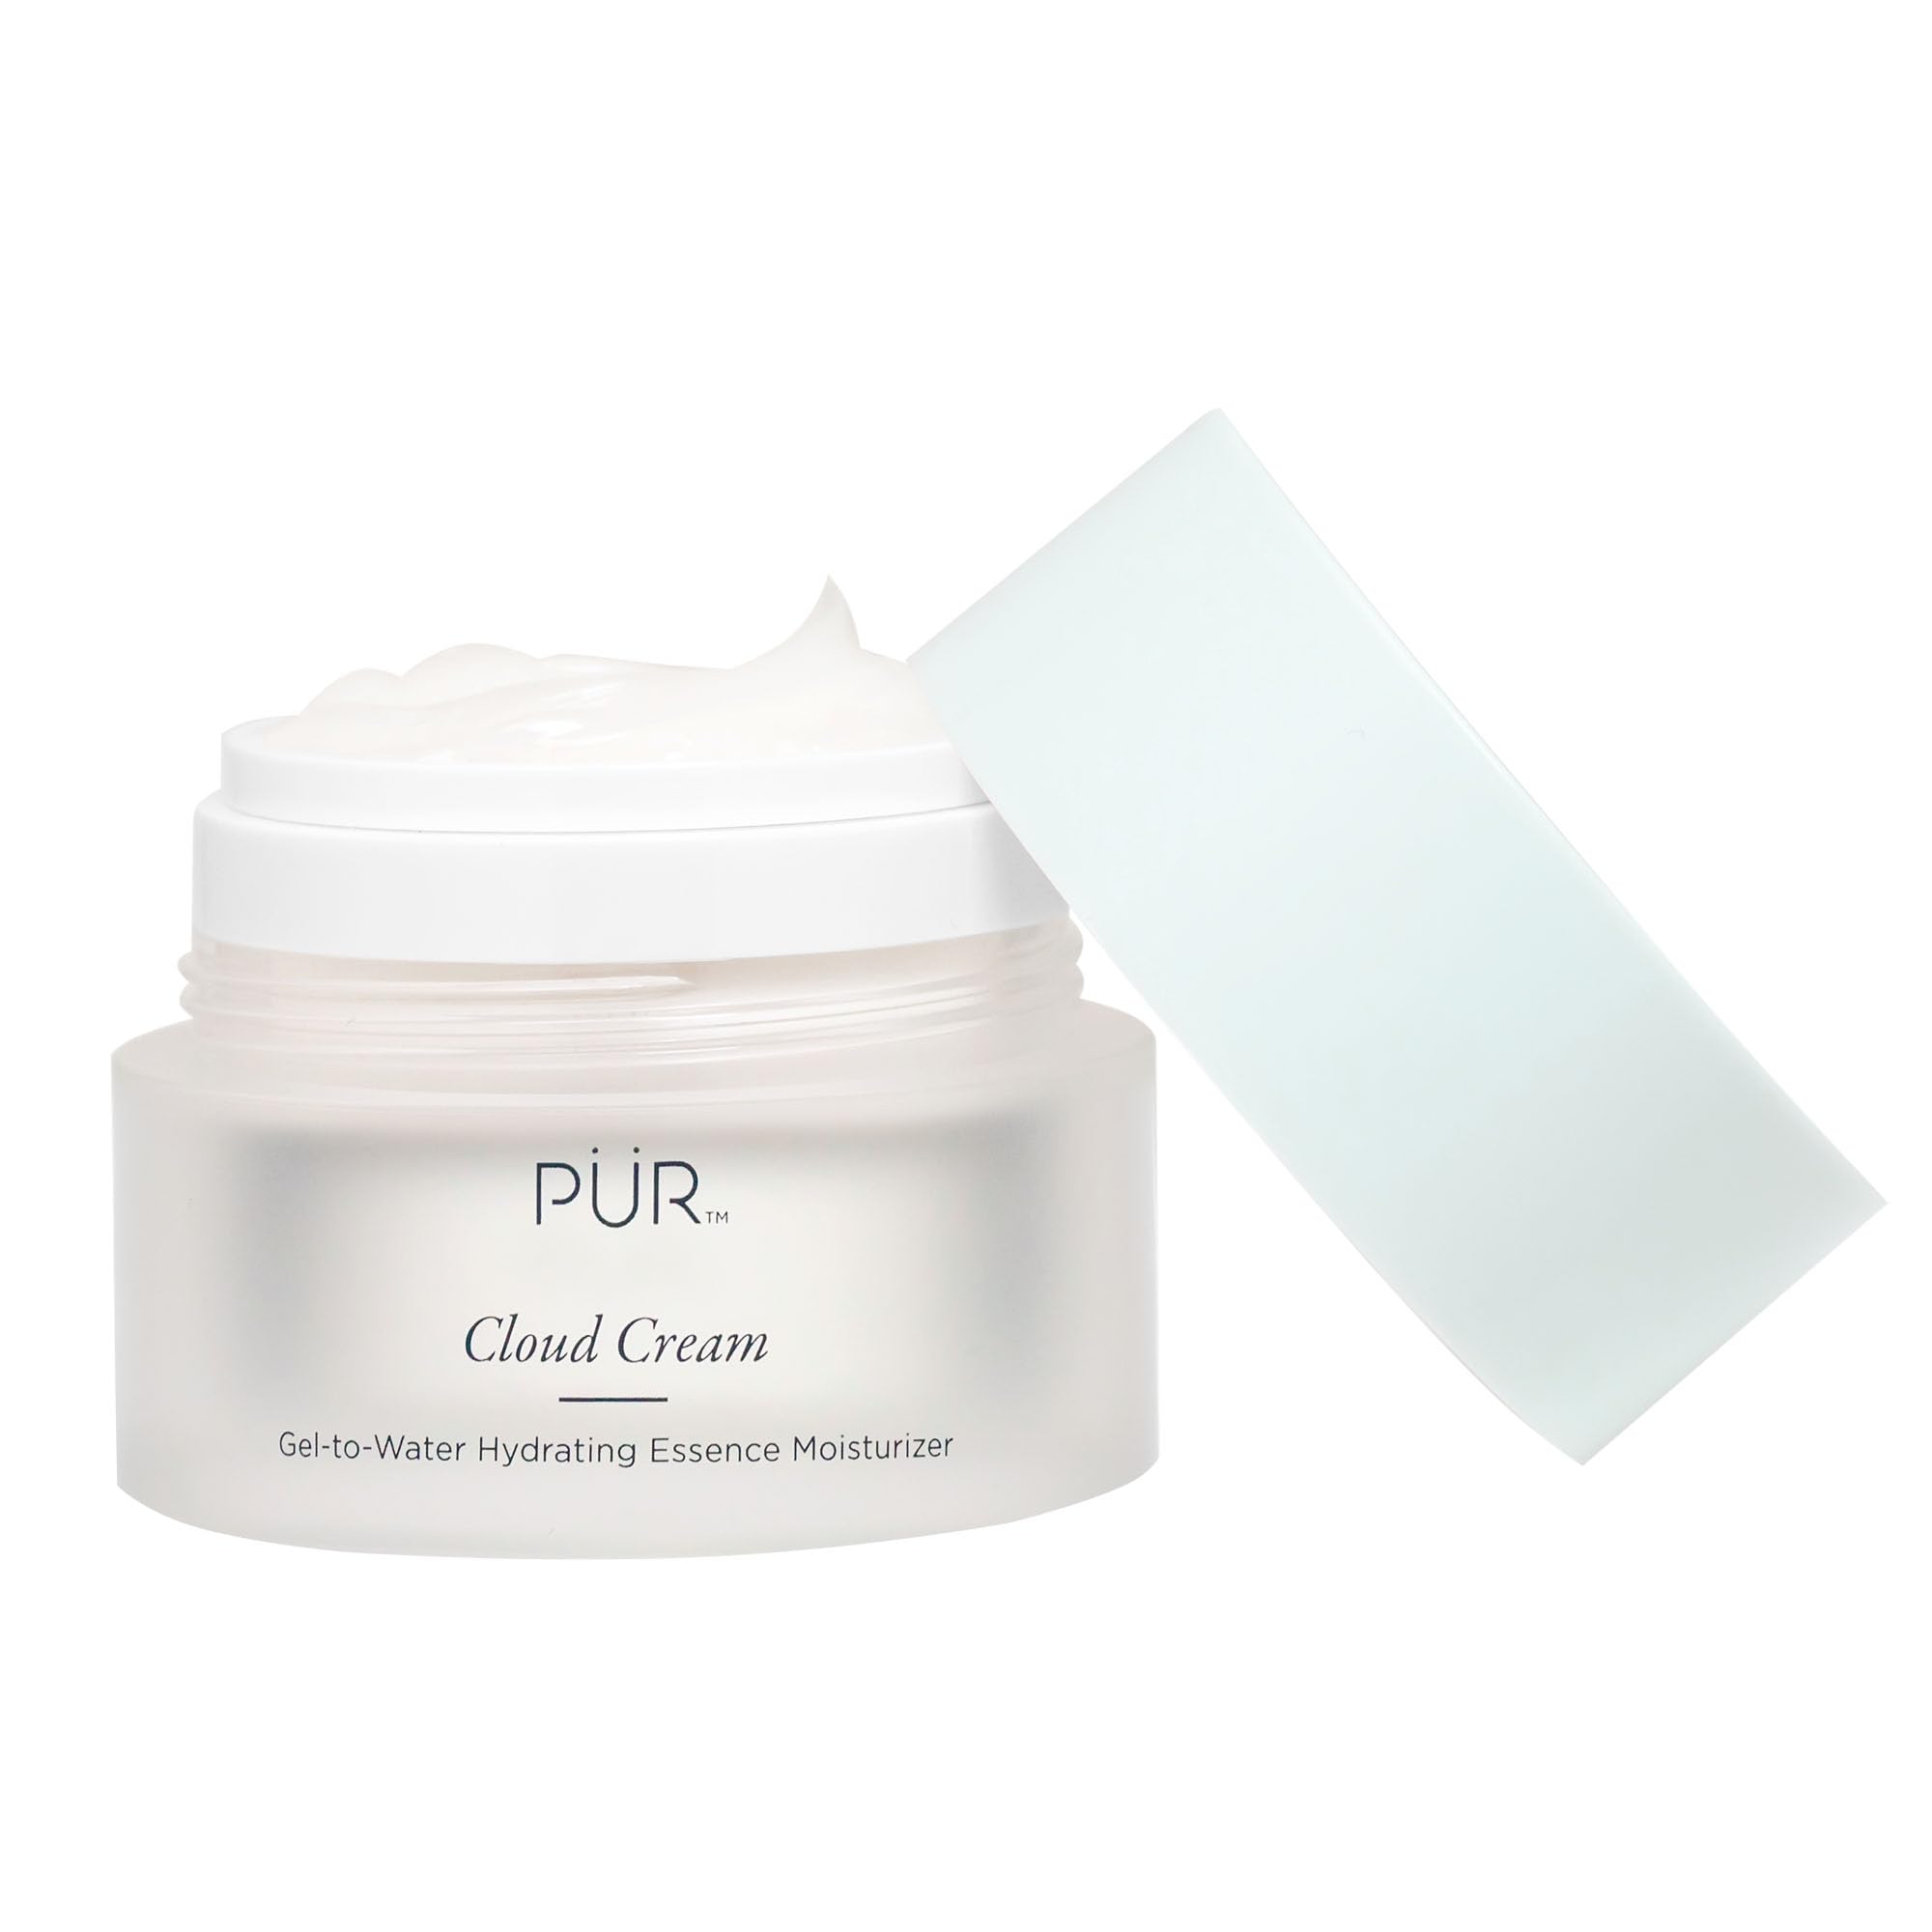 PÜR MINERALS 4-in-1 Cloud Cream Face Moisturizer - Water-To-Gel Hydrating Formula for All Skin Types - 2oz